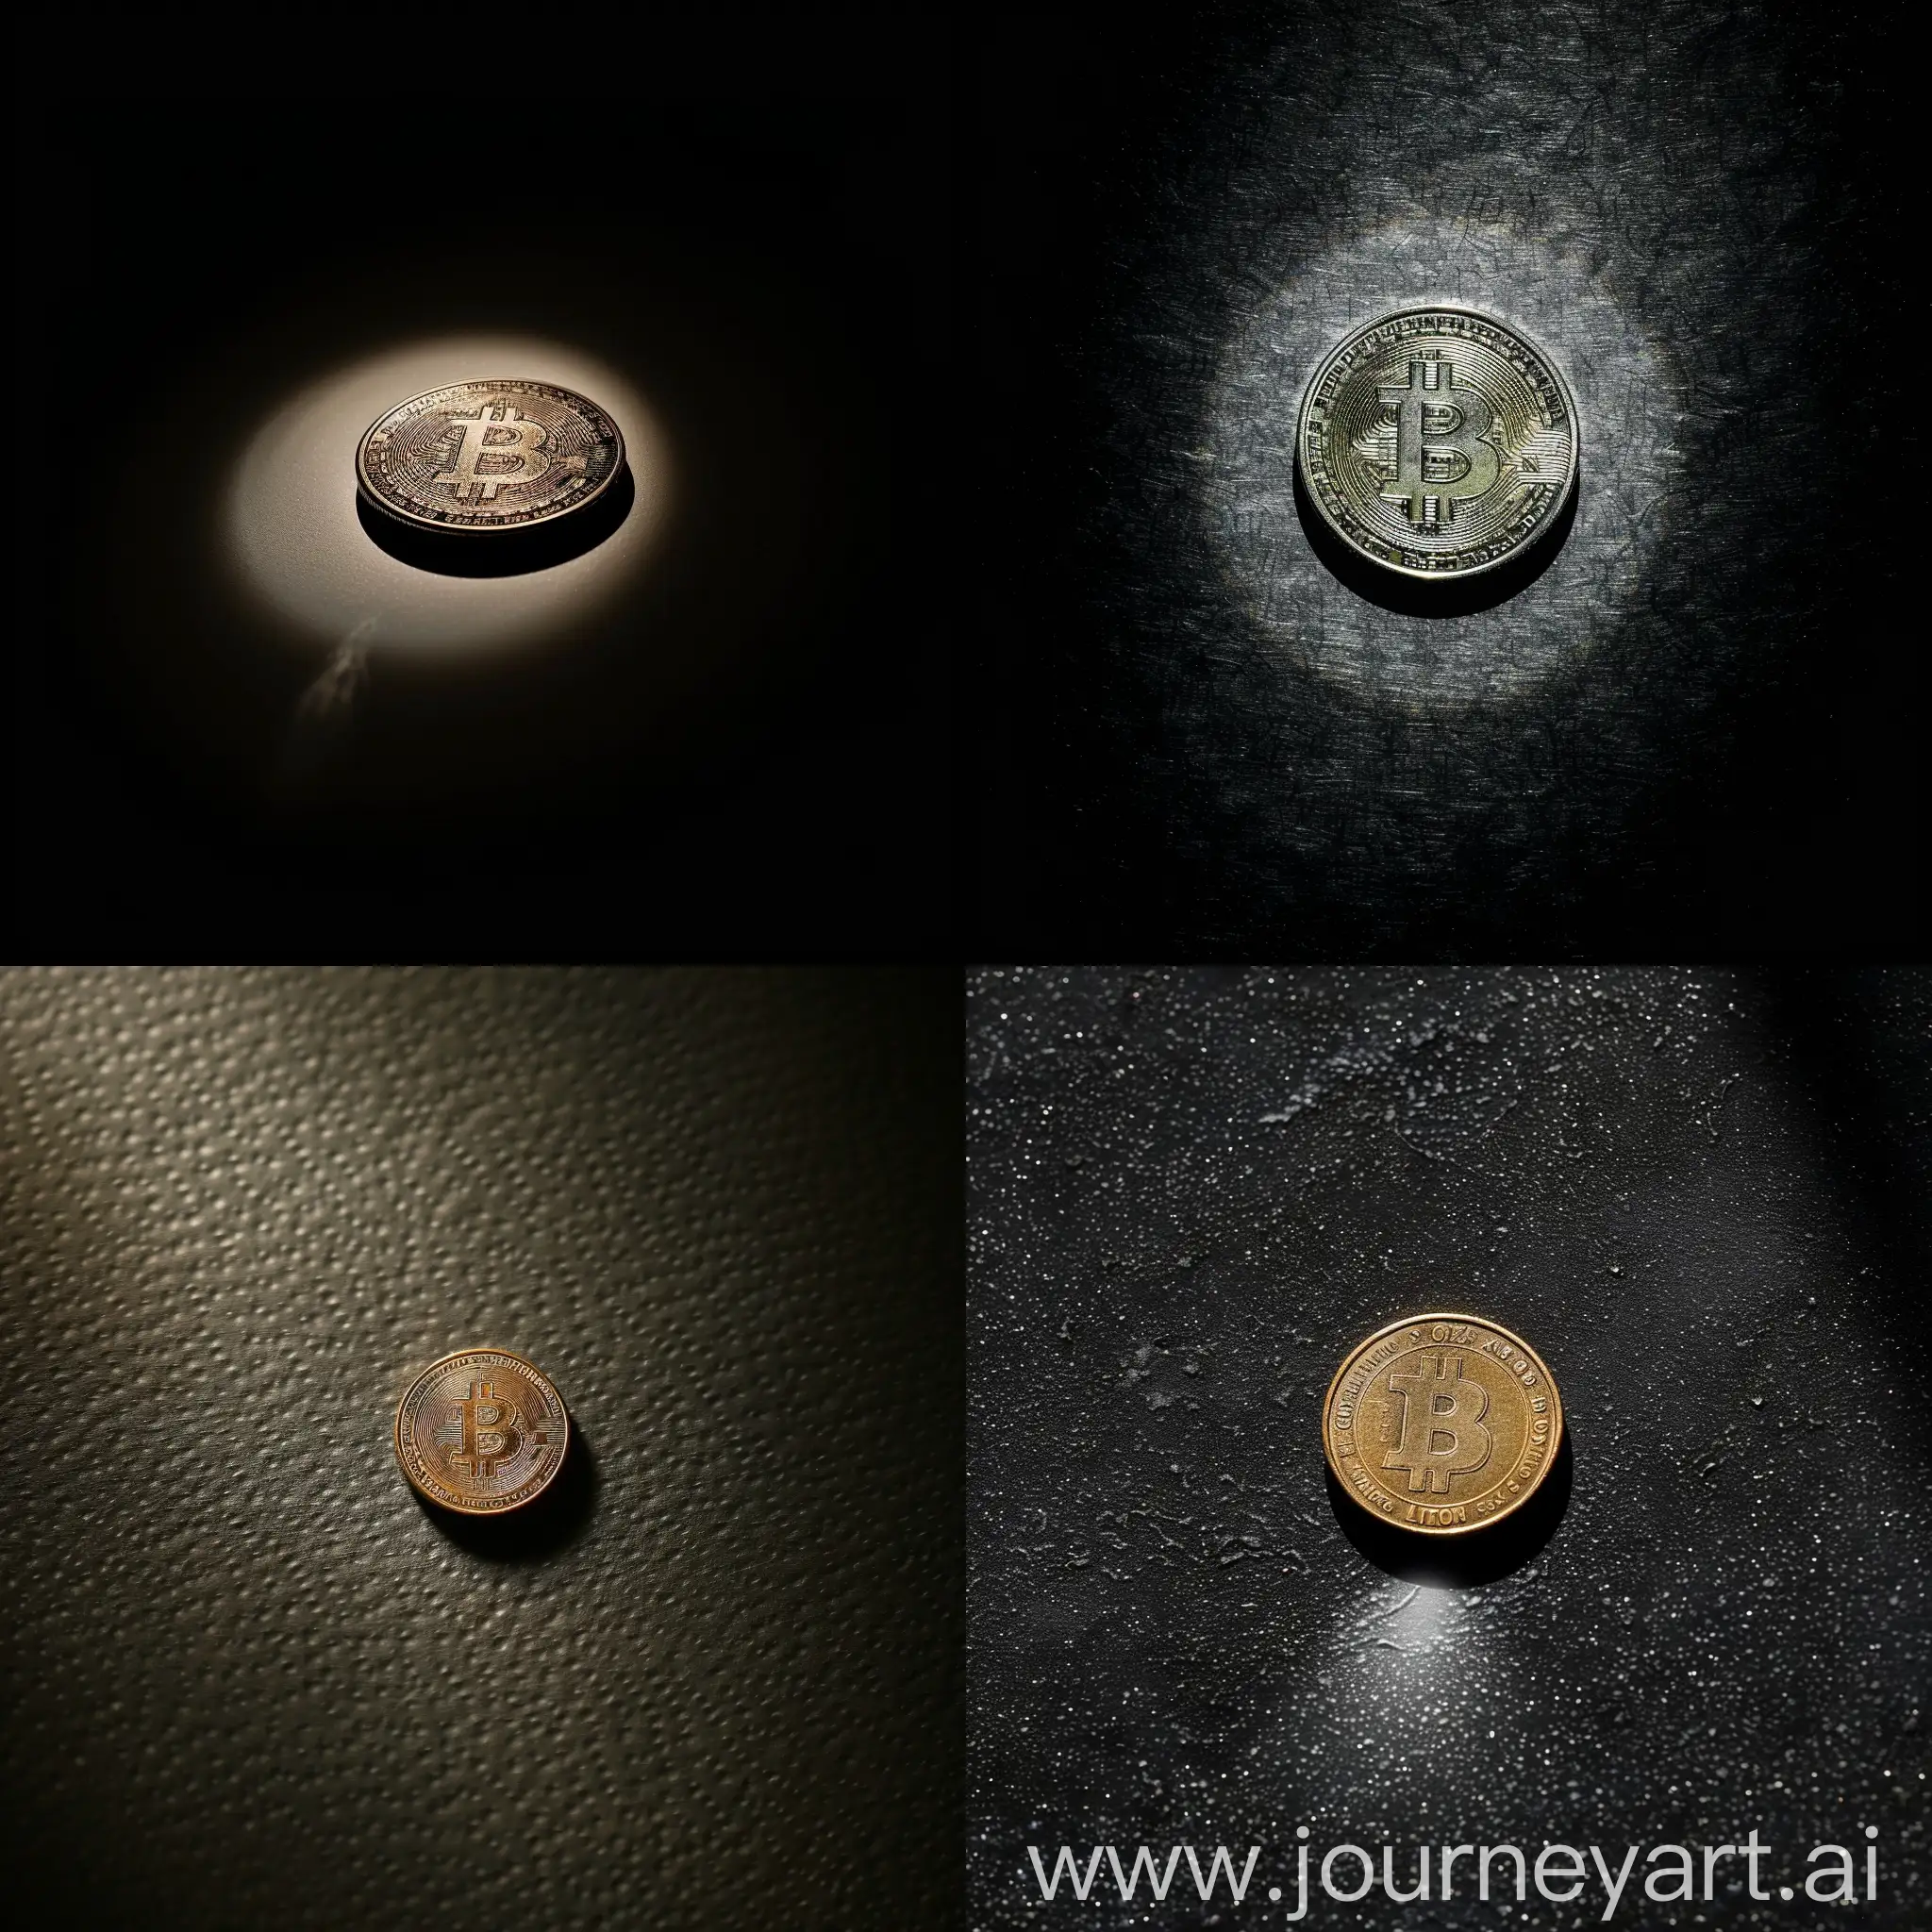 coin in the middle of the black background and the light spot on it